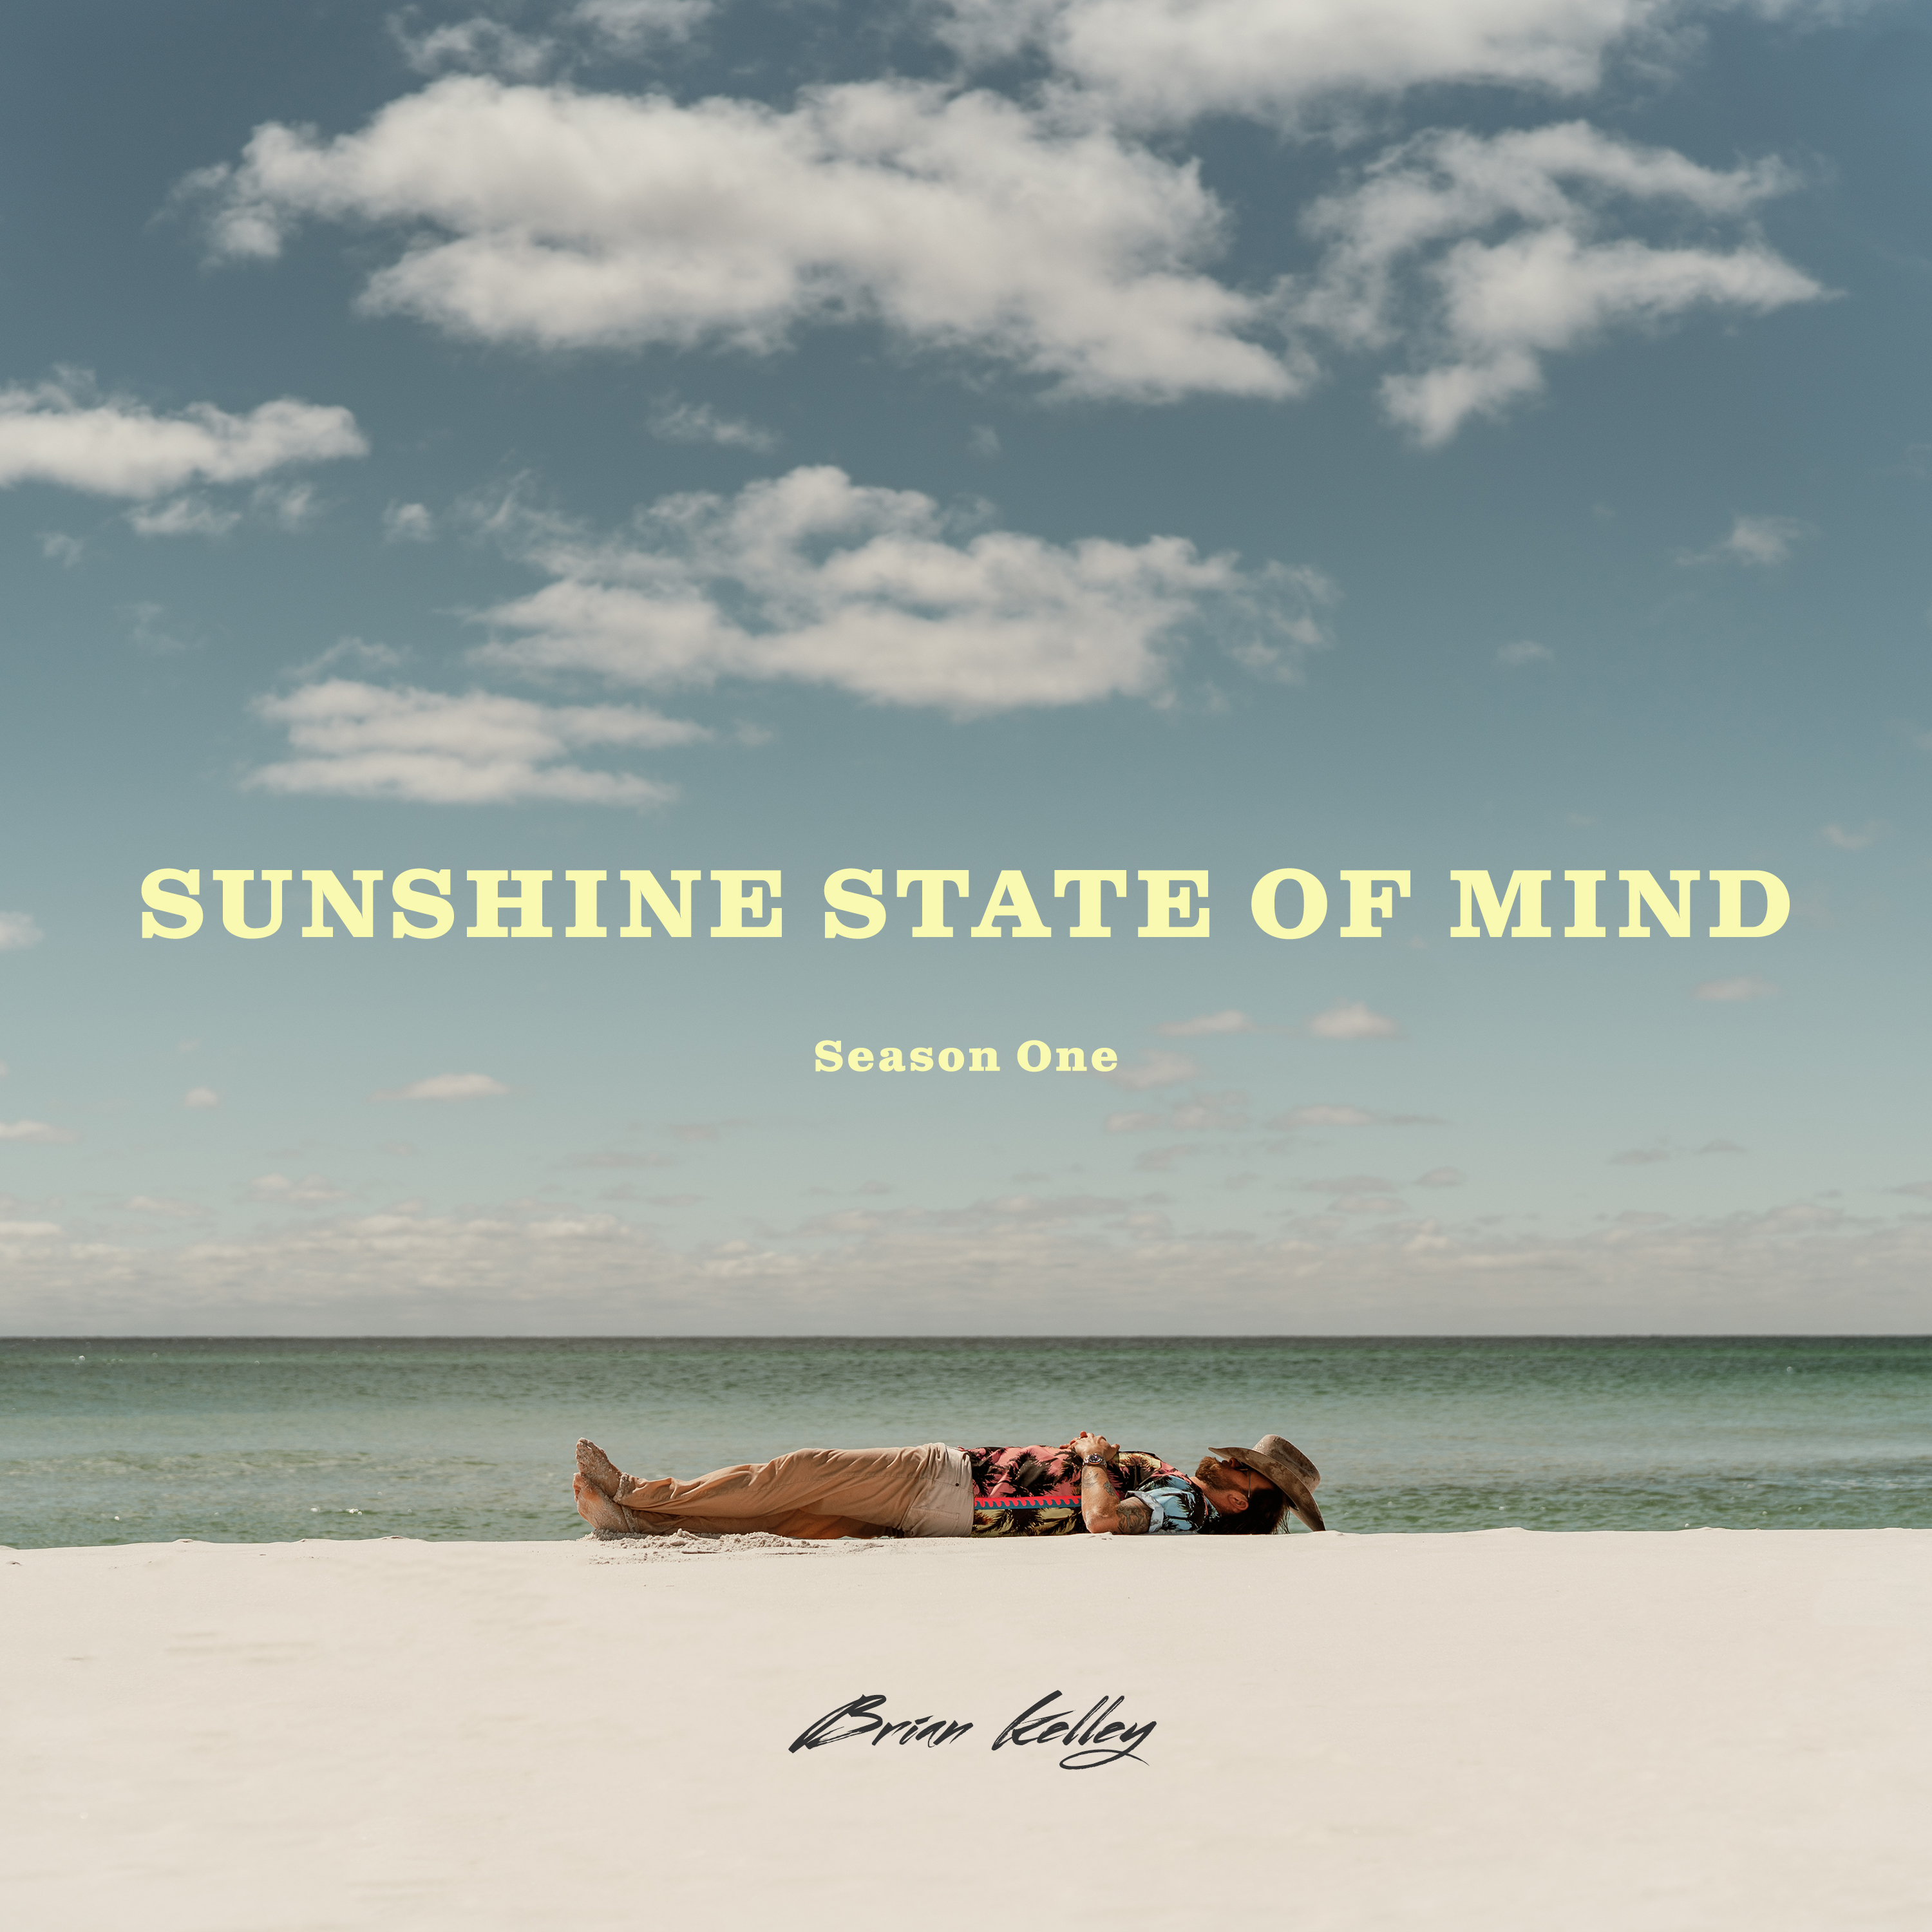 GET INTO A "SUNSHINE STATE OF MIND" WITH BRIAN KELLEY JUNE 25